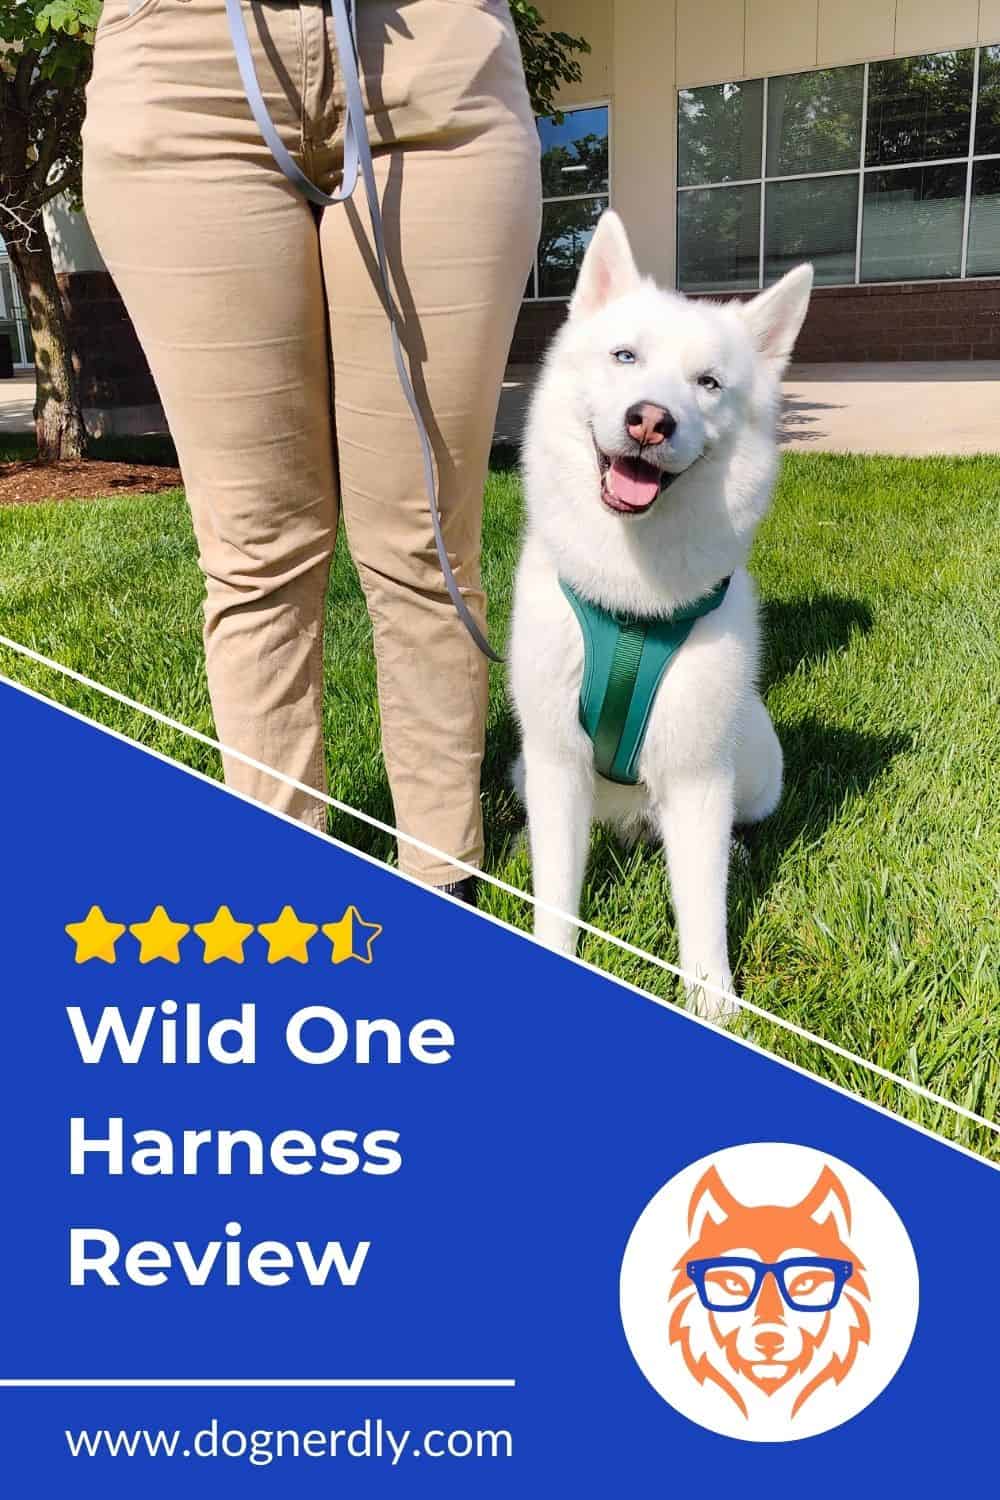 Wild One Harness Review: A Dog Trainer’s Perspective